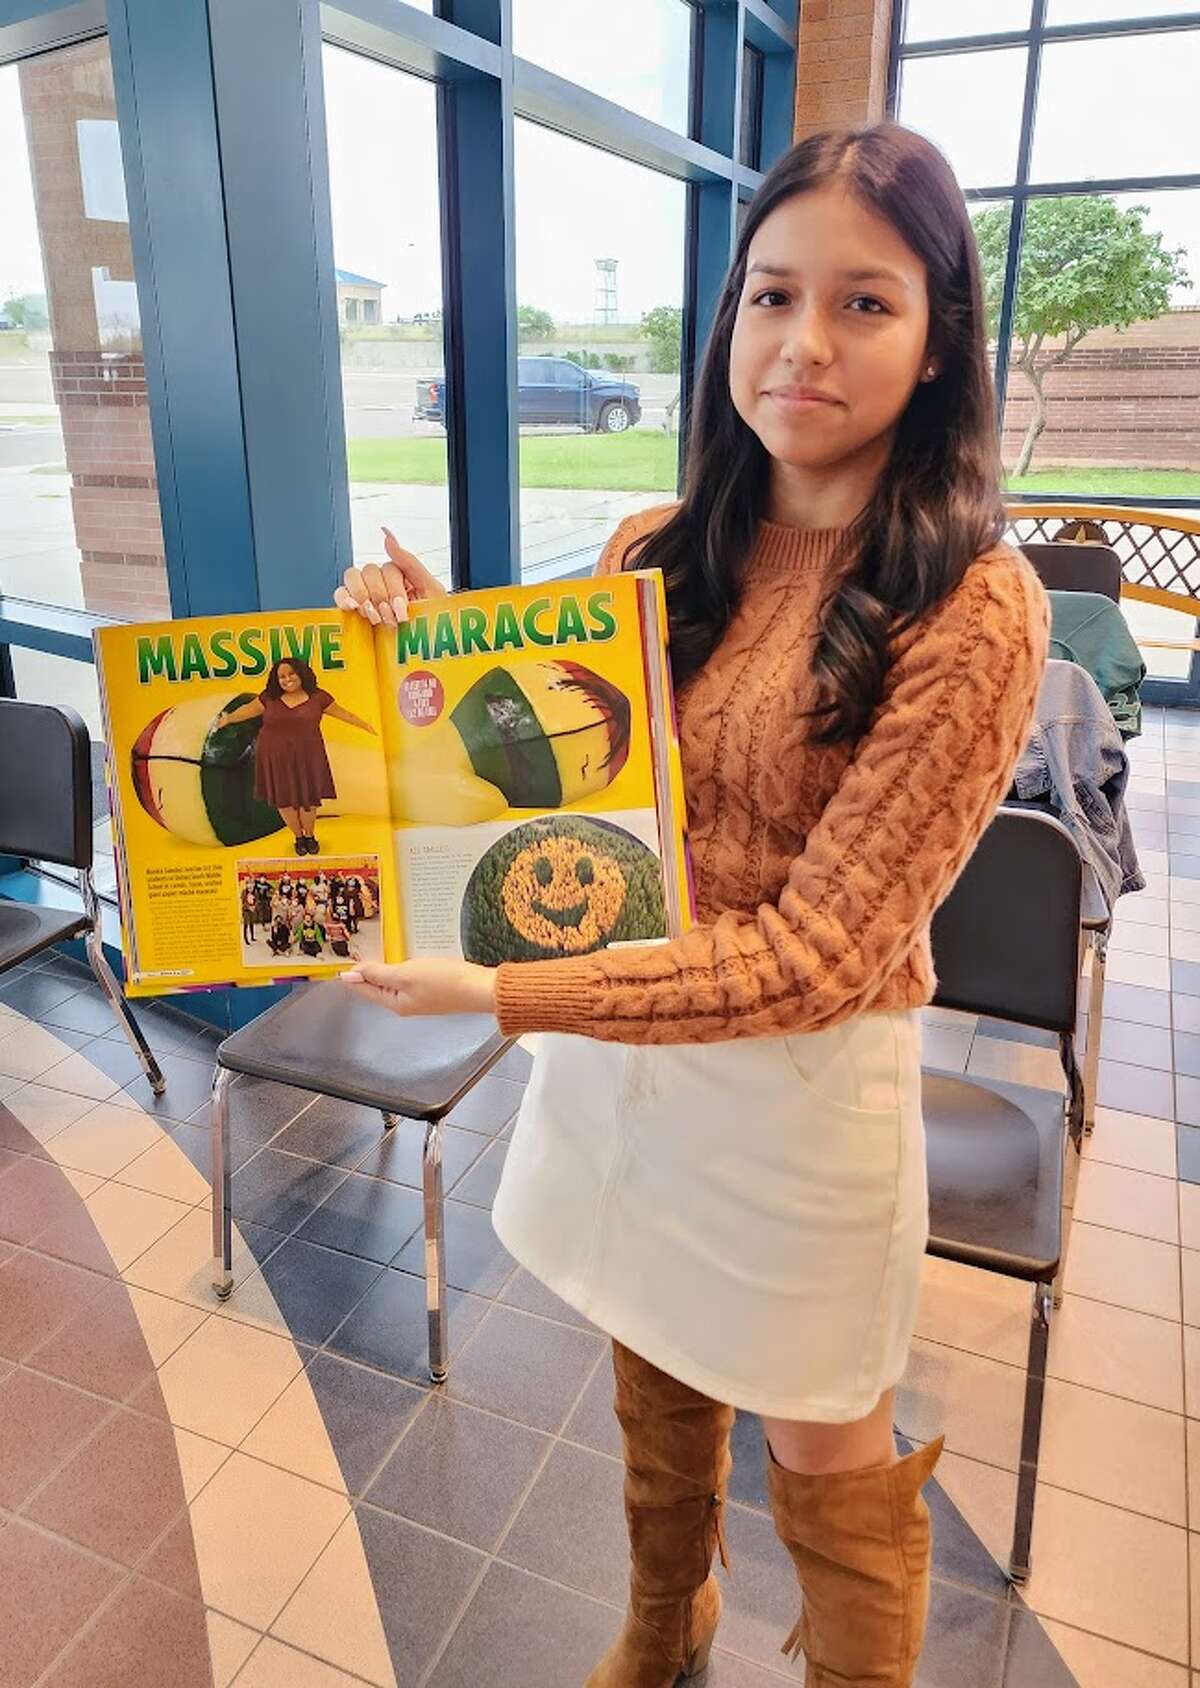 United South High School sophomore Iris Rosas holds up a copy of the latest Ripley's Believe It or Not! book which features the art project of giant papier-mache maracas created by United South Middle School teacher Monika Sanchez and her former students.